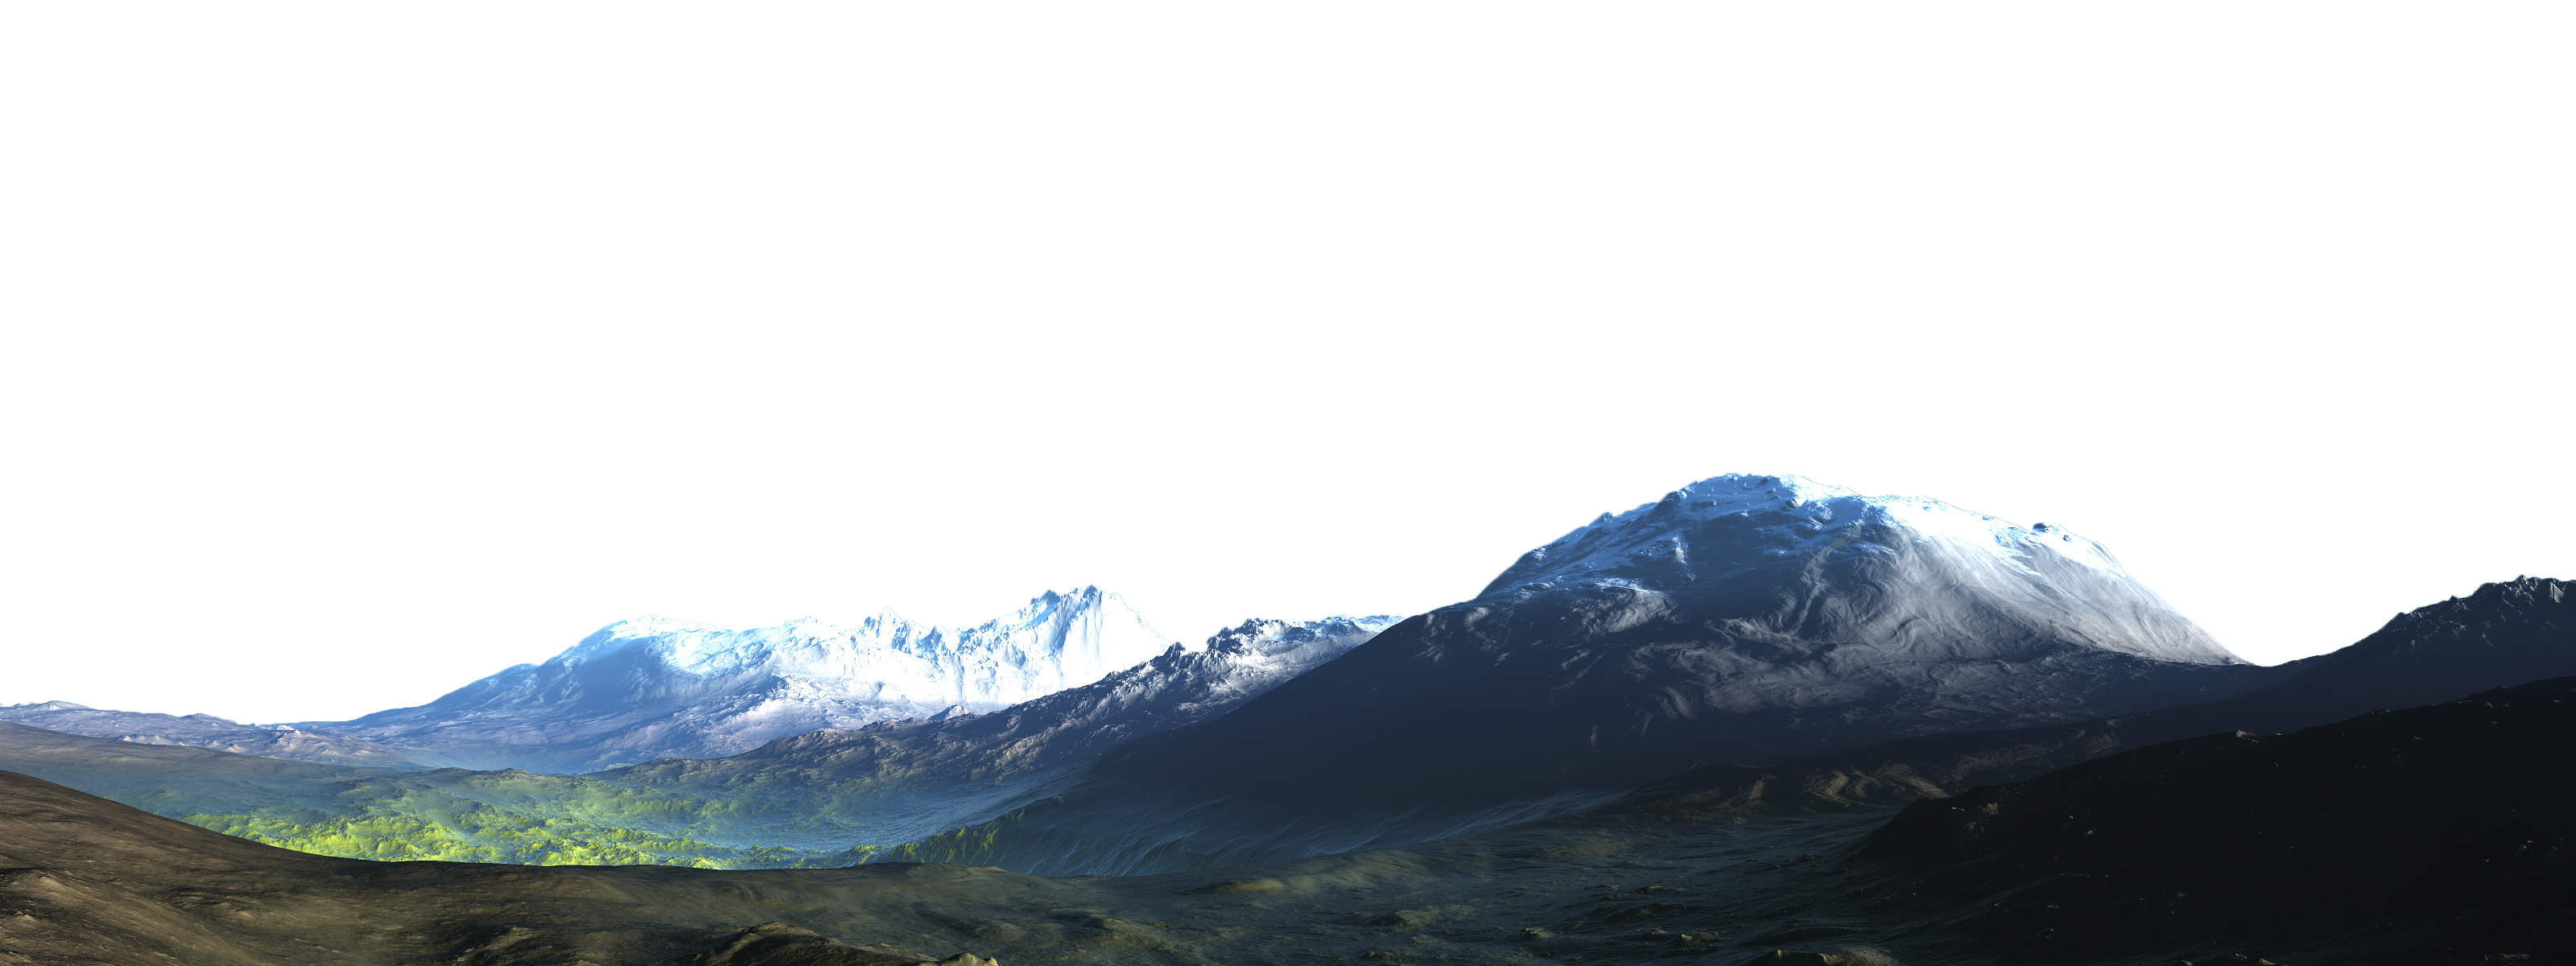 Mountain Png File Png Image - Mountain, Transparent background PNG HD thumbnail